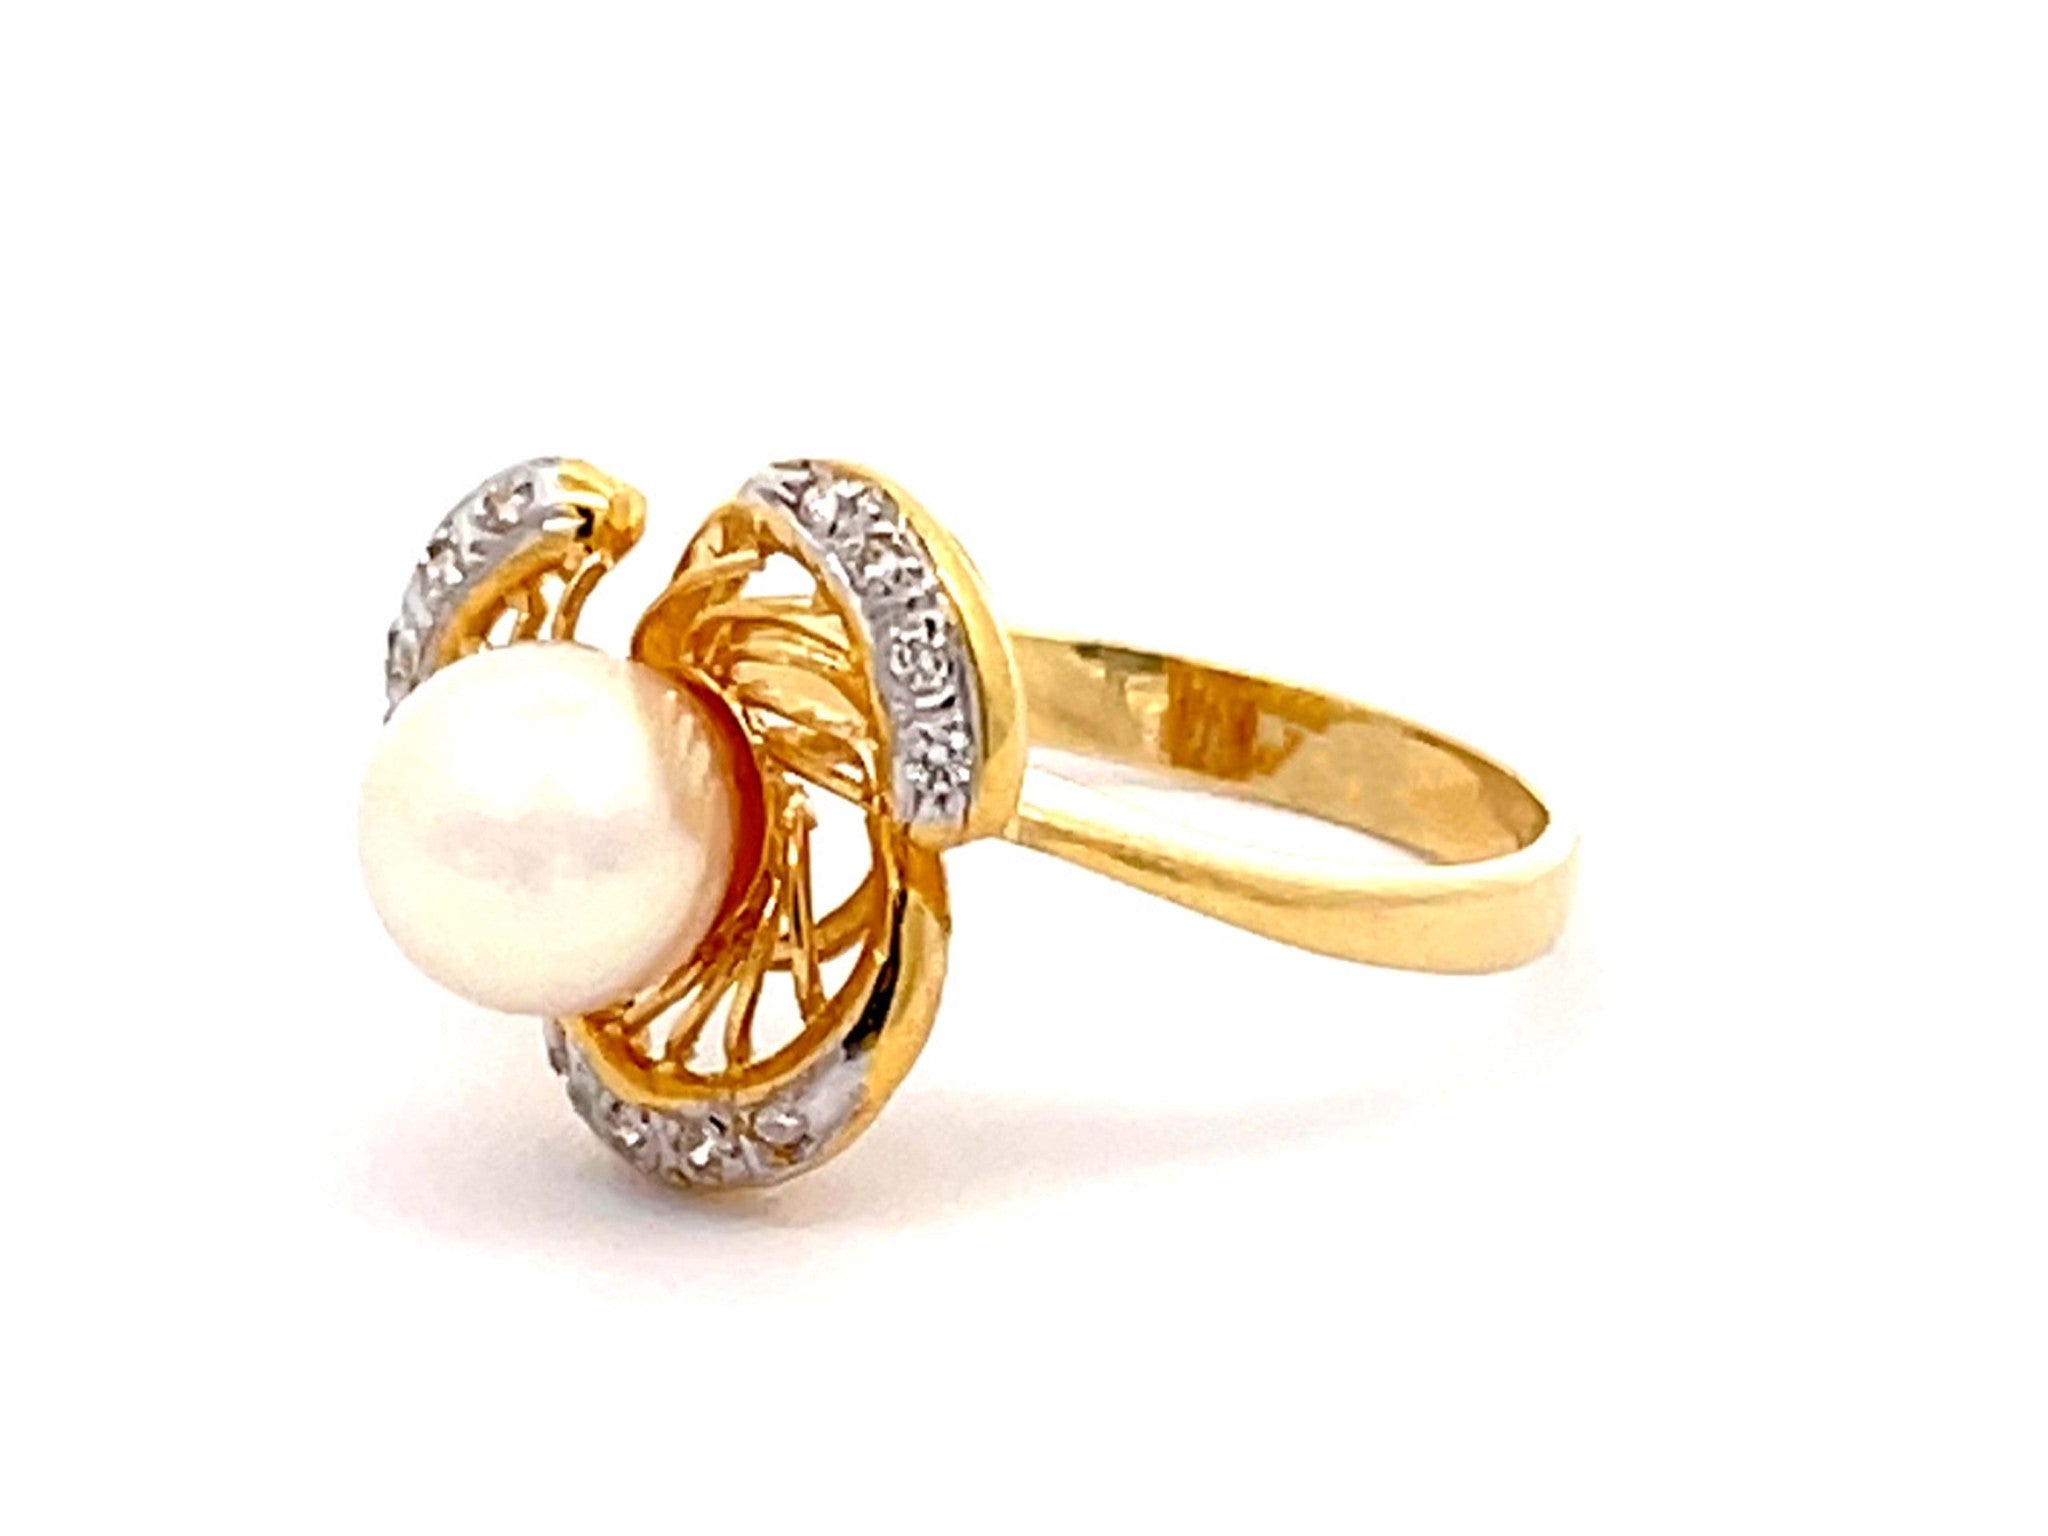 White Pearl and Diamond Ring in 14k White Gold